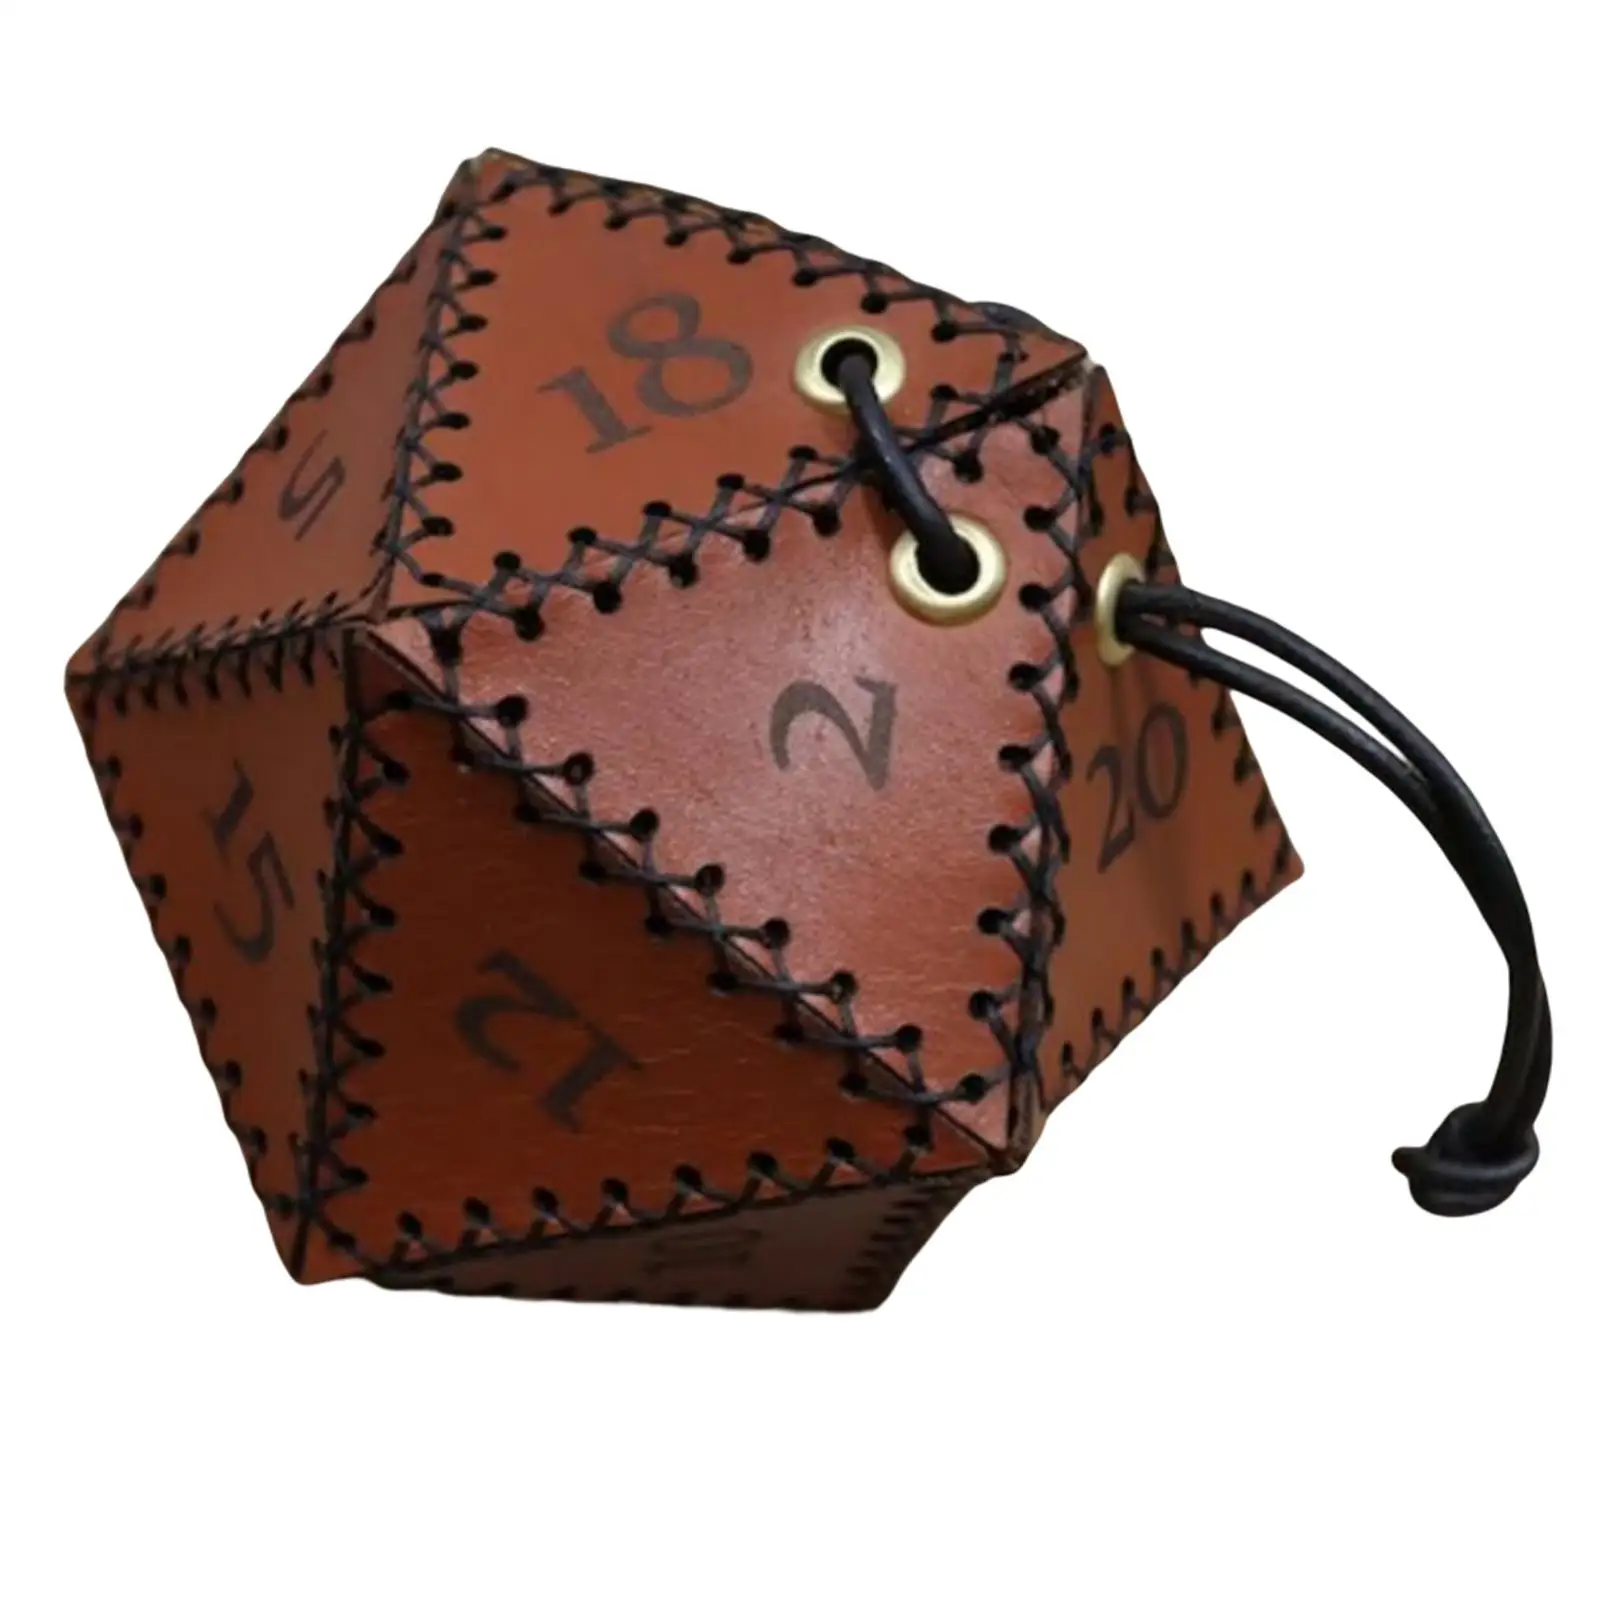 Polyhedral Dices Bag Multipurpose Gifts Storage Bags for Number Games KTV Camping